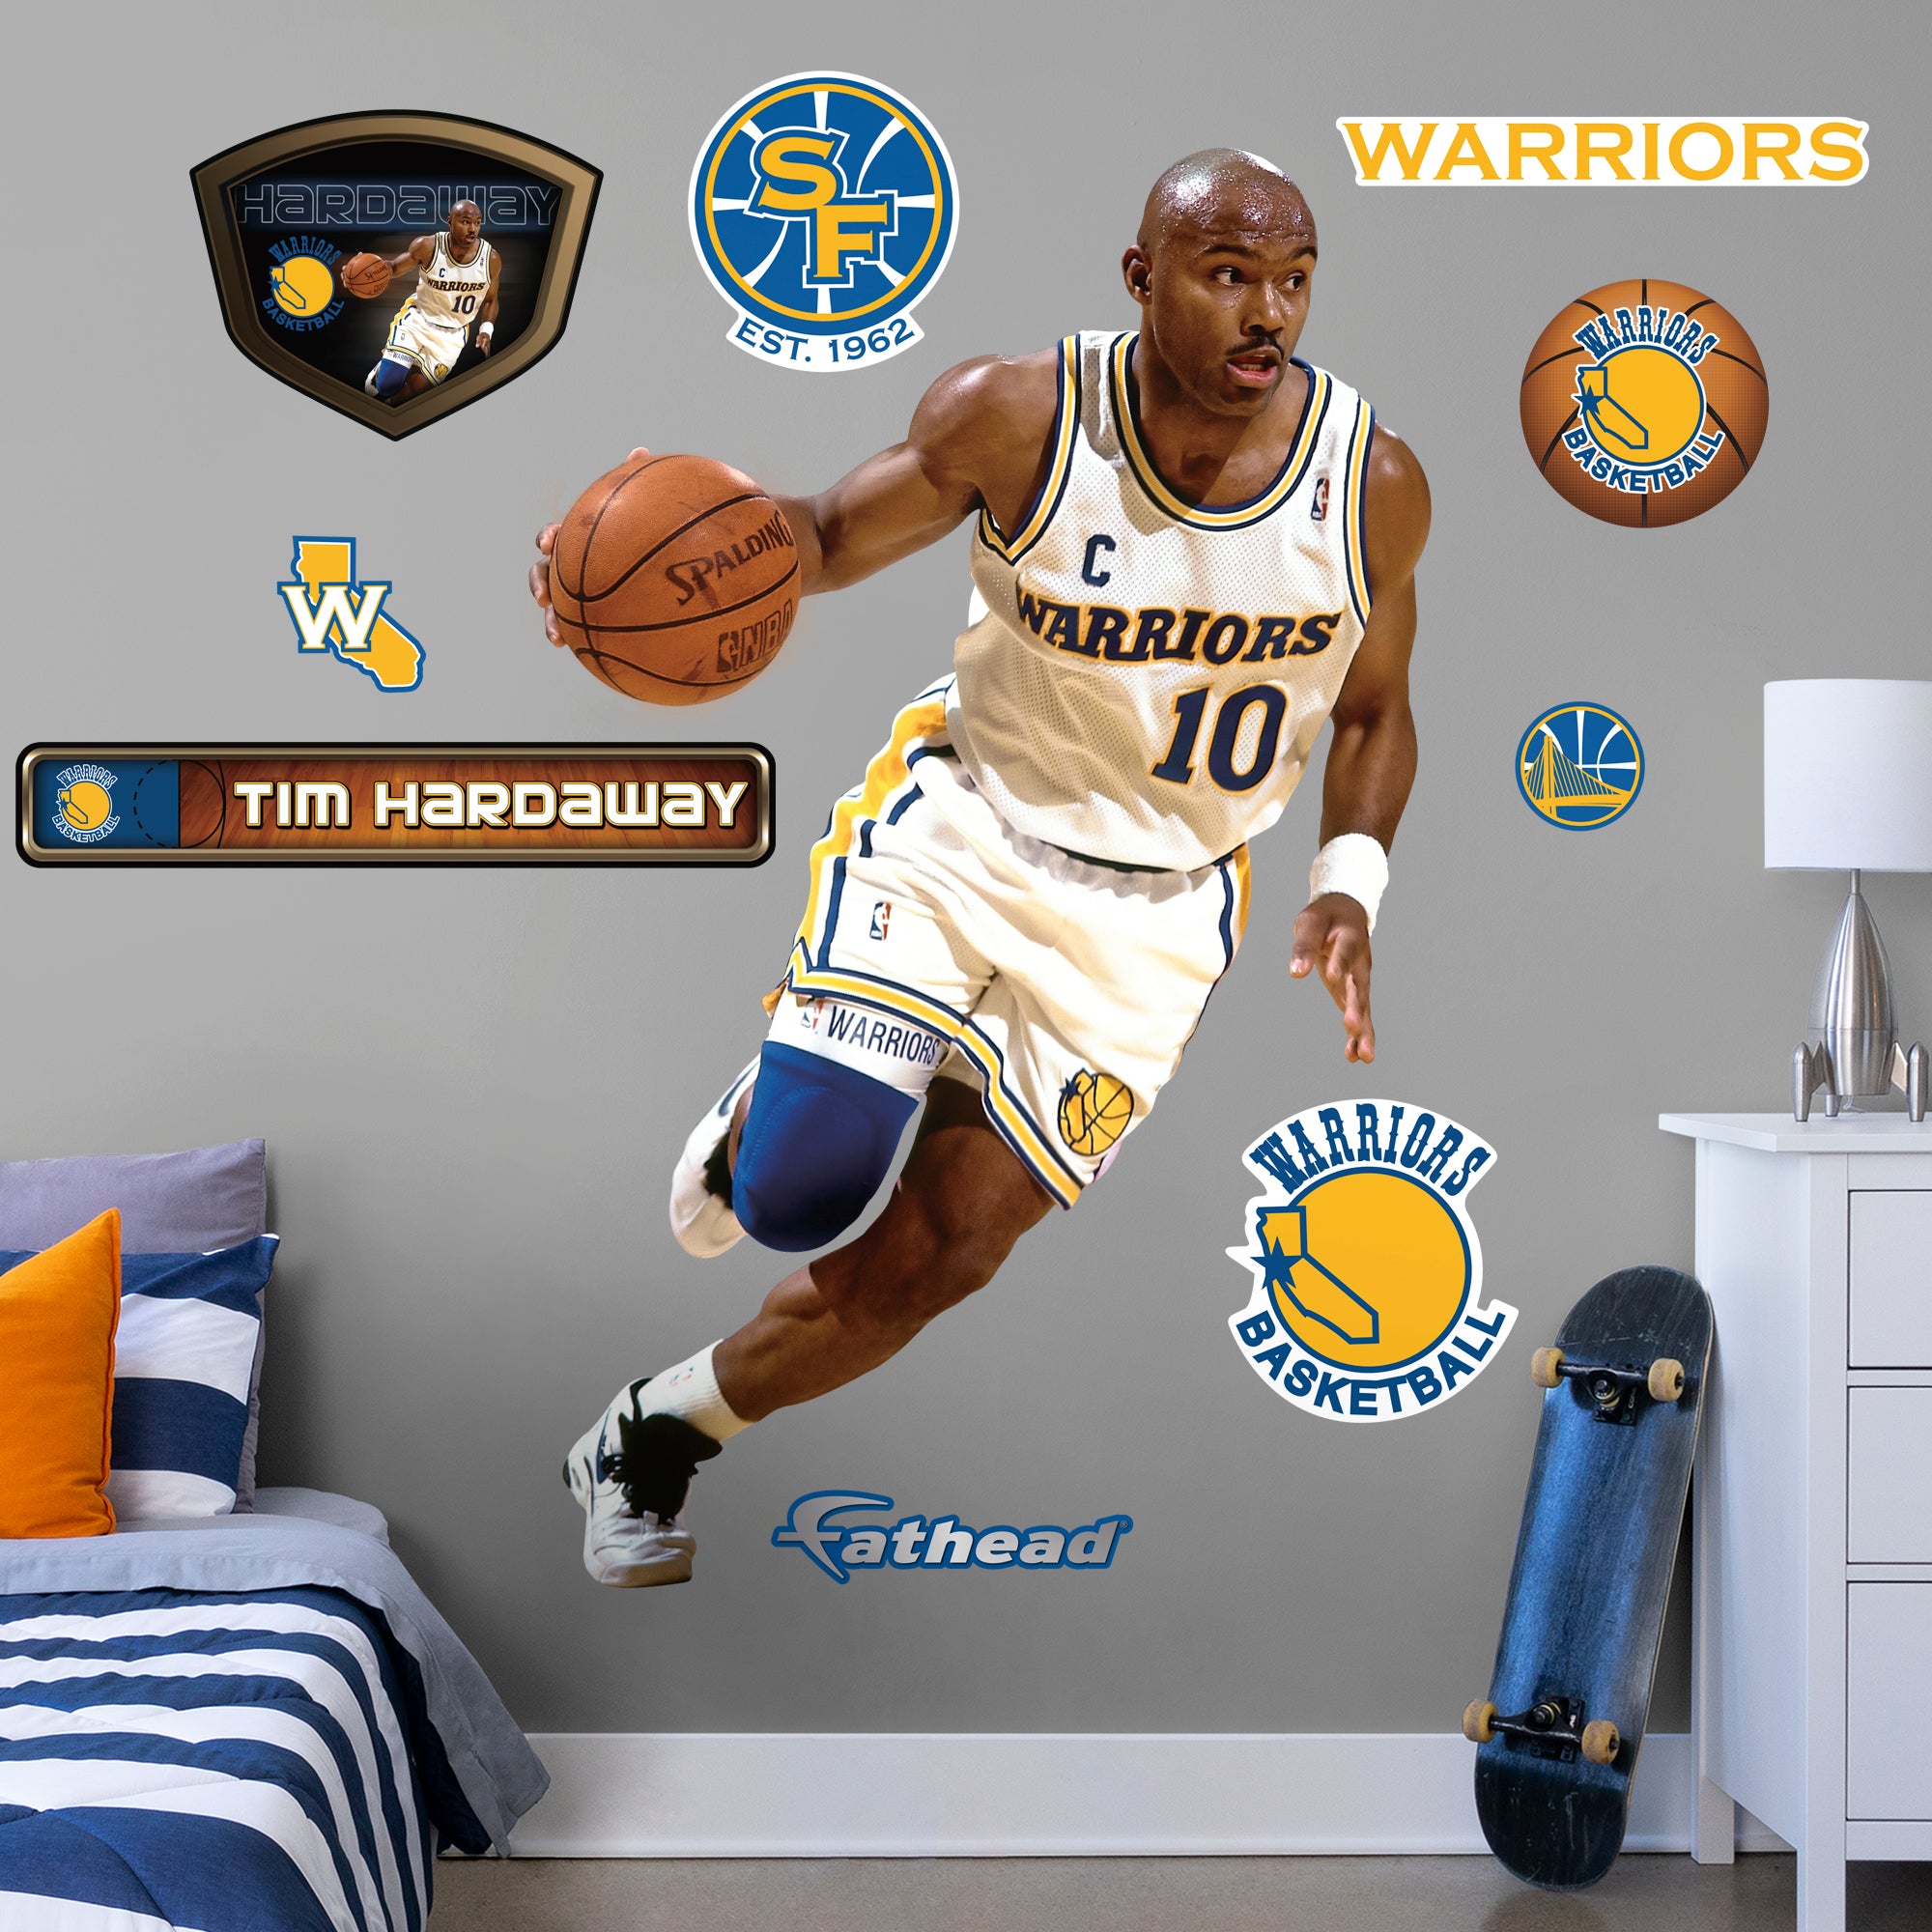 Tim Hardaway Legend - Officially Licensed NBA Removable Wall Decal Life-Size Athlete + 10 Decals (45"W x 71"H) by Fathead | Viny